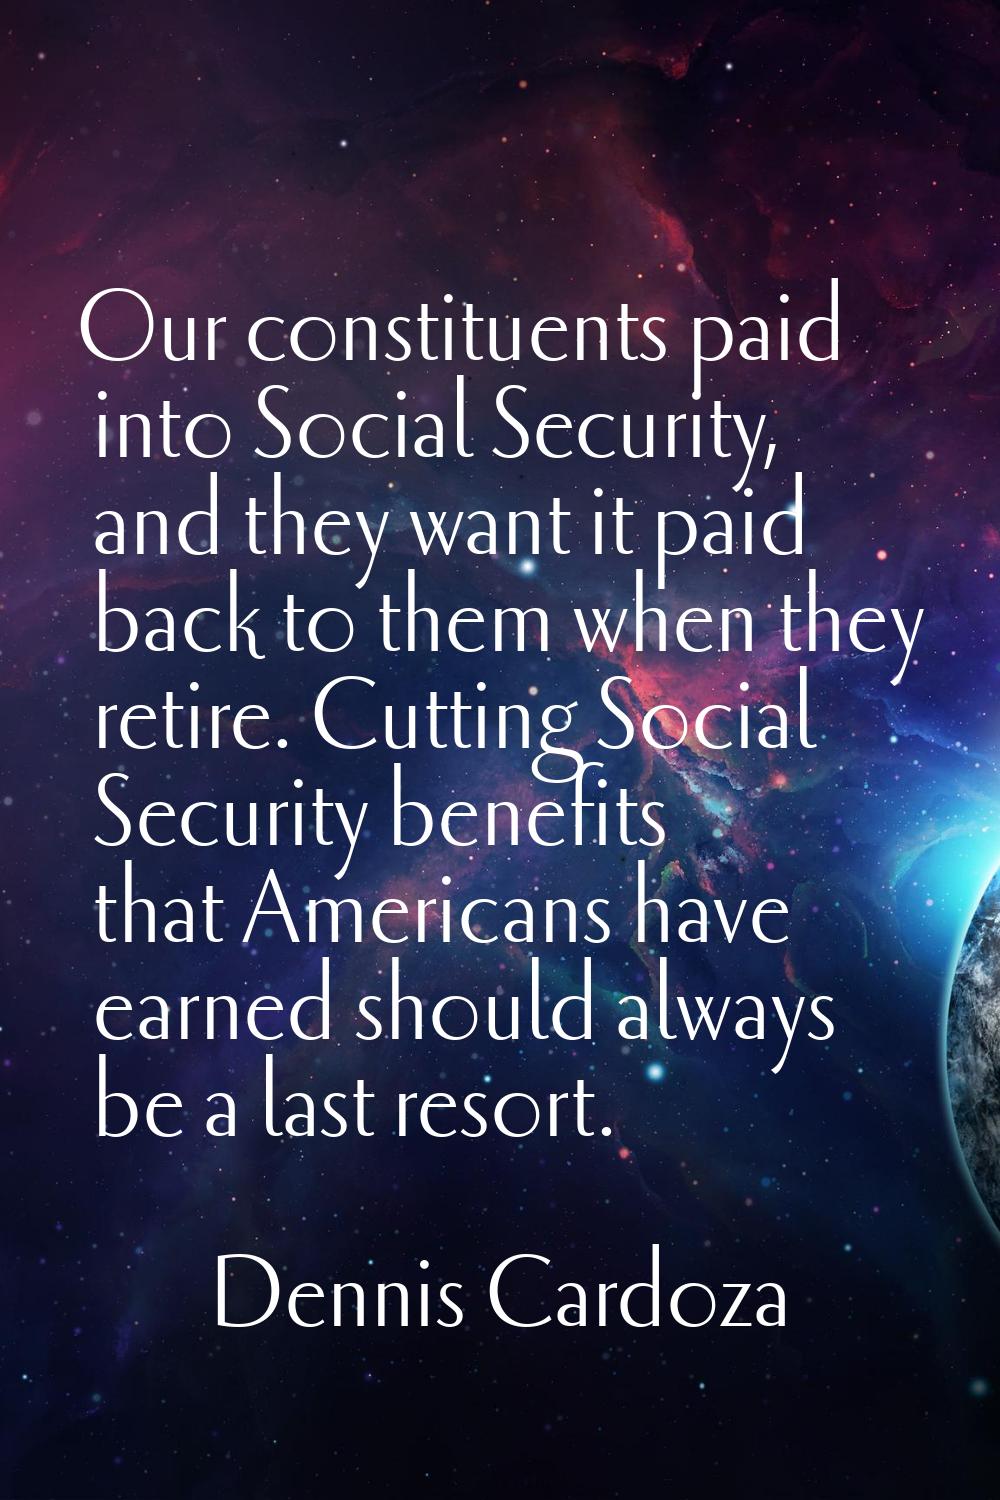 Our constituents paid into Social Security, and they want it paid back to them when they retire. Cu